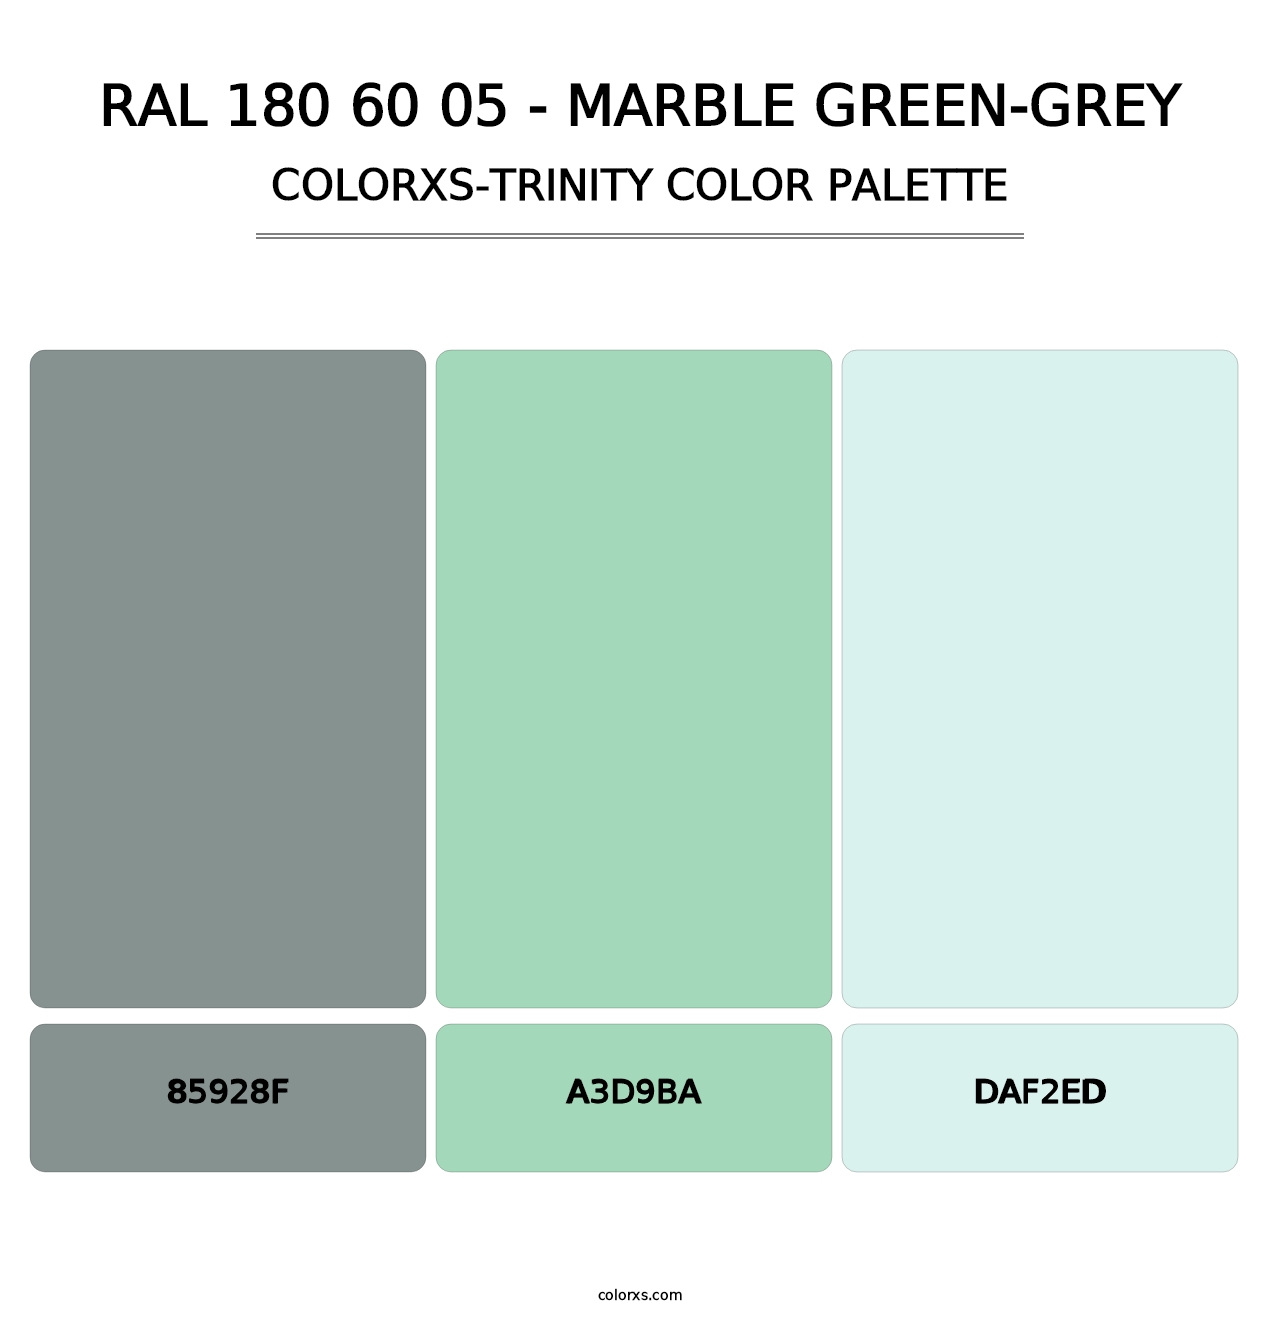 RAL 180 60 05 - Marble Green-Grey - Colorxs Trinity Palette